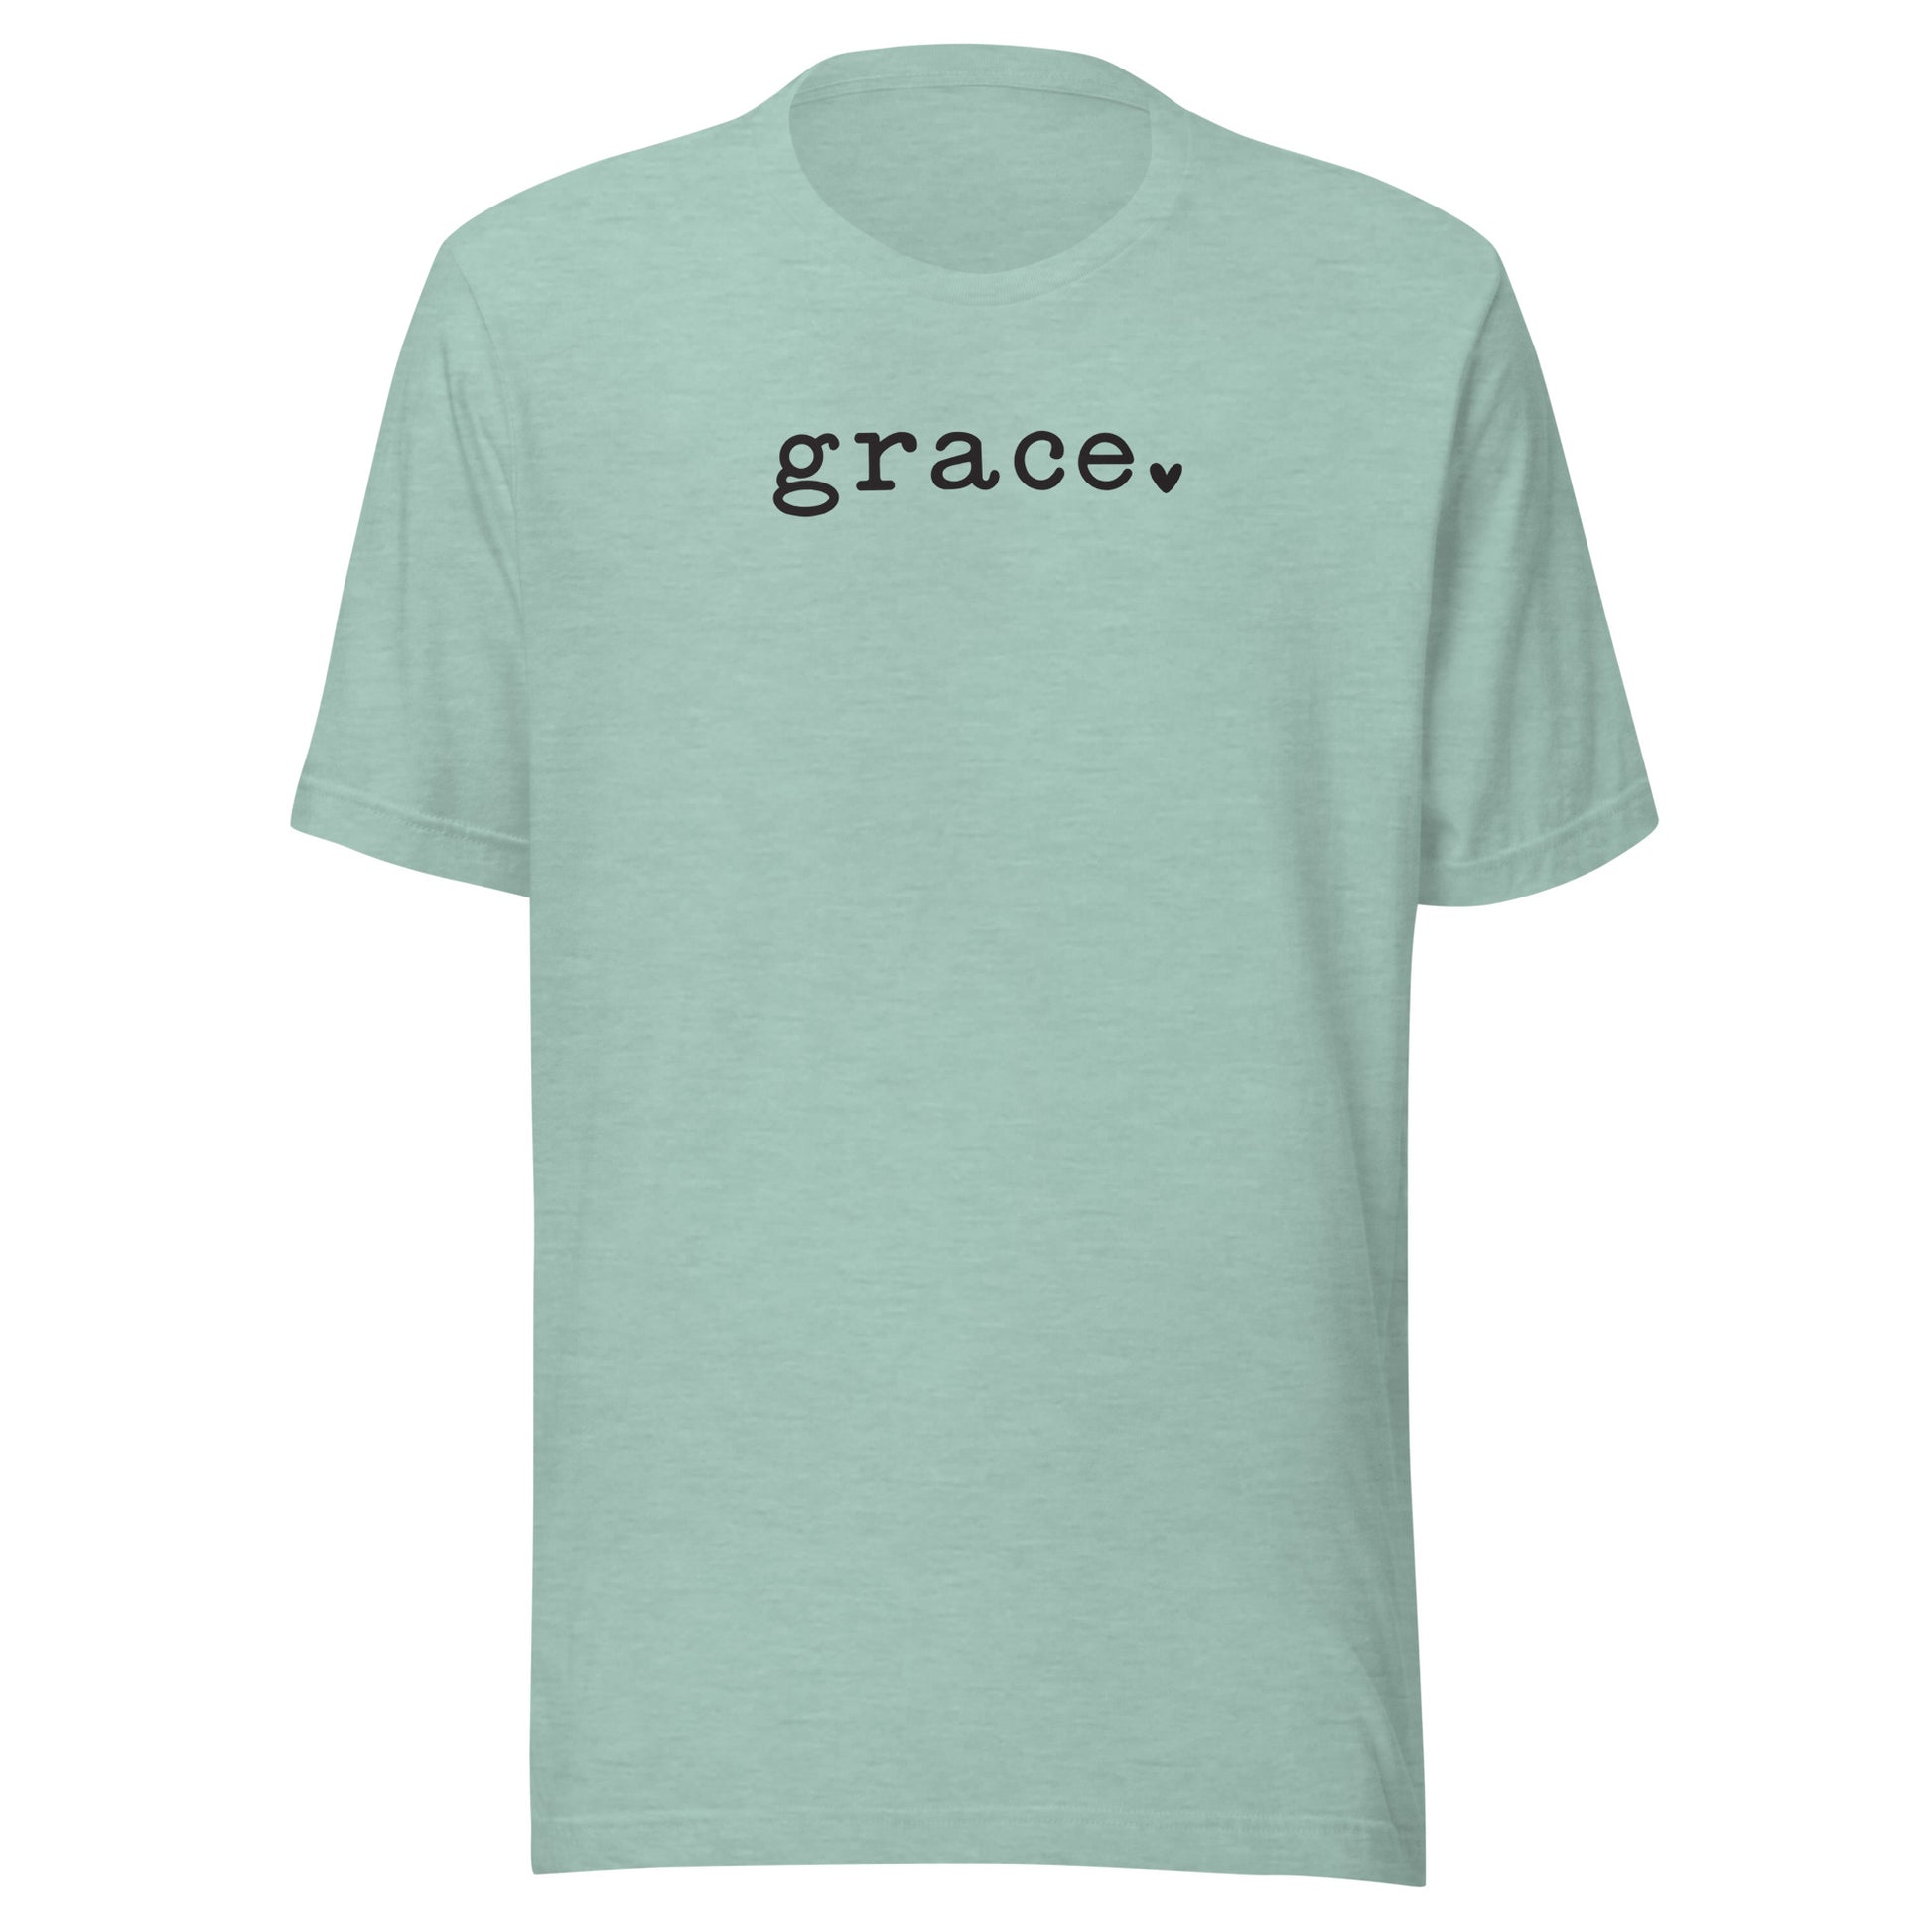 Wear Your Faith Proudly with the Grace T-Shirt - Radiate Positive Energy